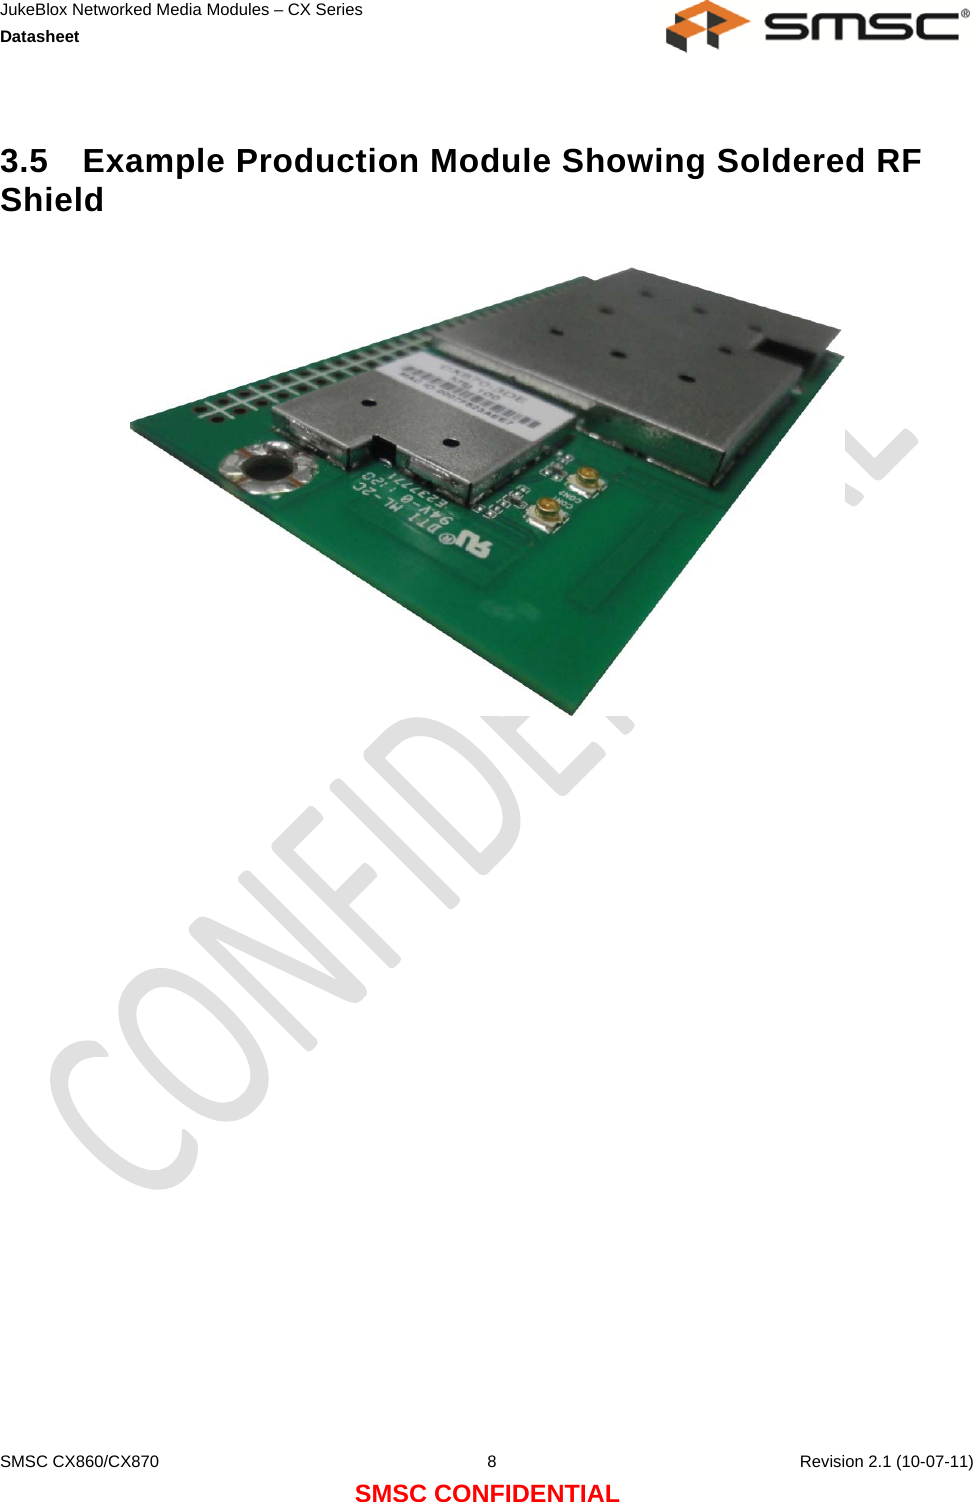 JukeBlox Networked Media Modules – CX Series  Datasheet    SMSC CX860/CX870  8    Revision 2.1 (10-07-11) SMSC CONFIDENTIAL  3.5 Example Production Module Showing Soldered RF Shield    